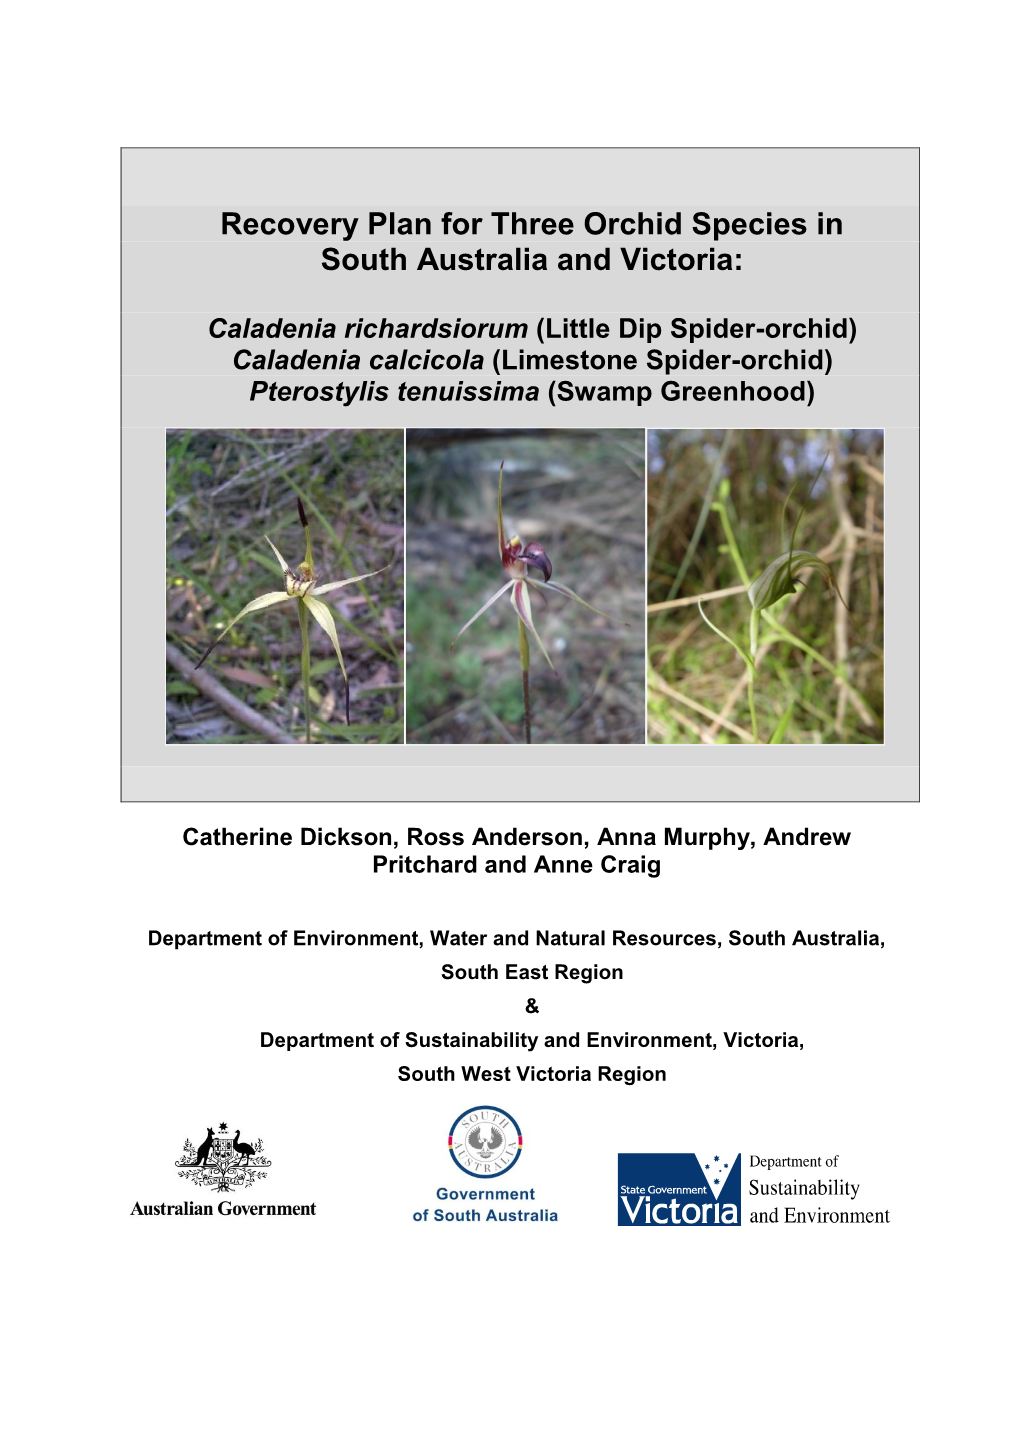 Recovery Plan for Three Orchid Species in South Australia and Victoria